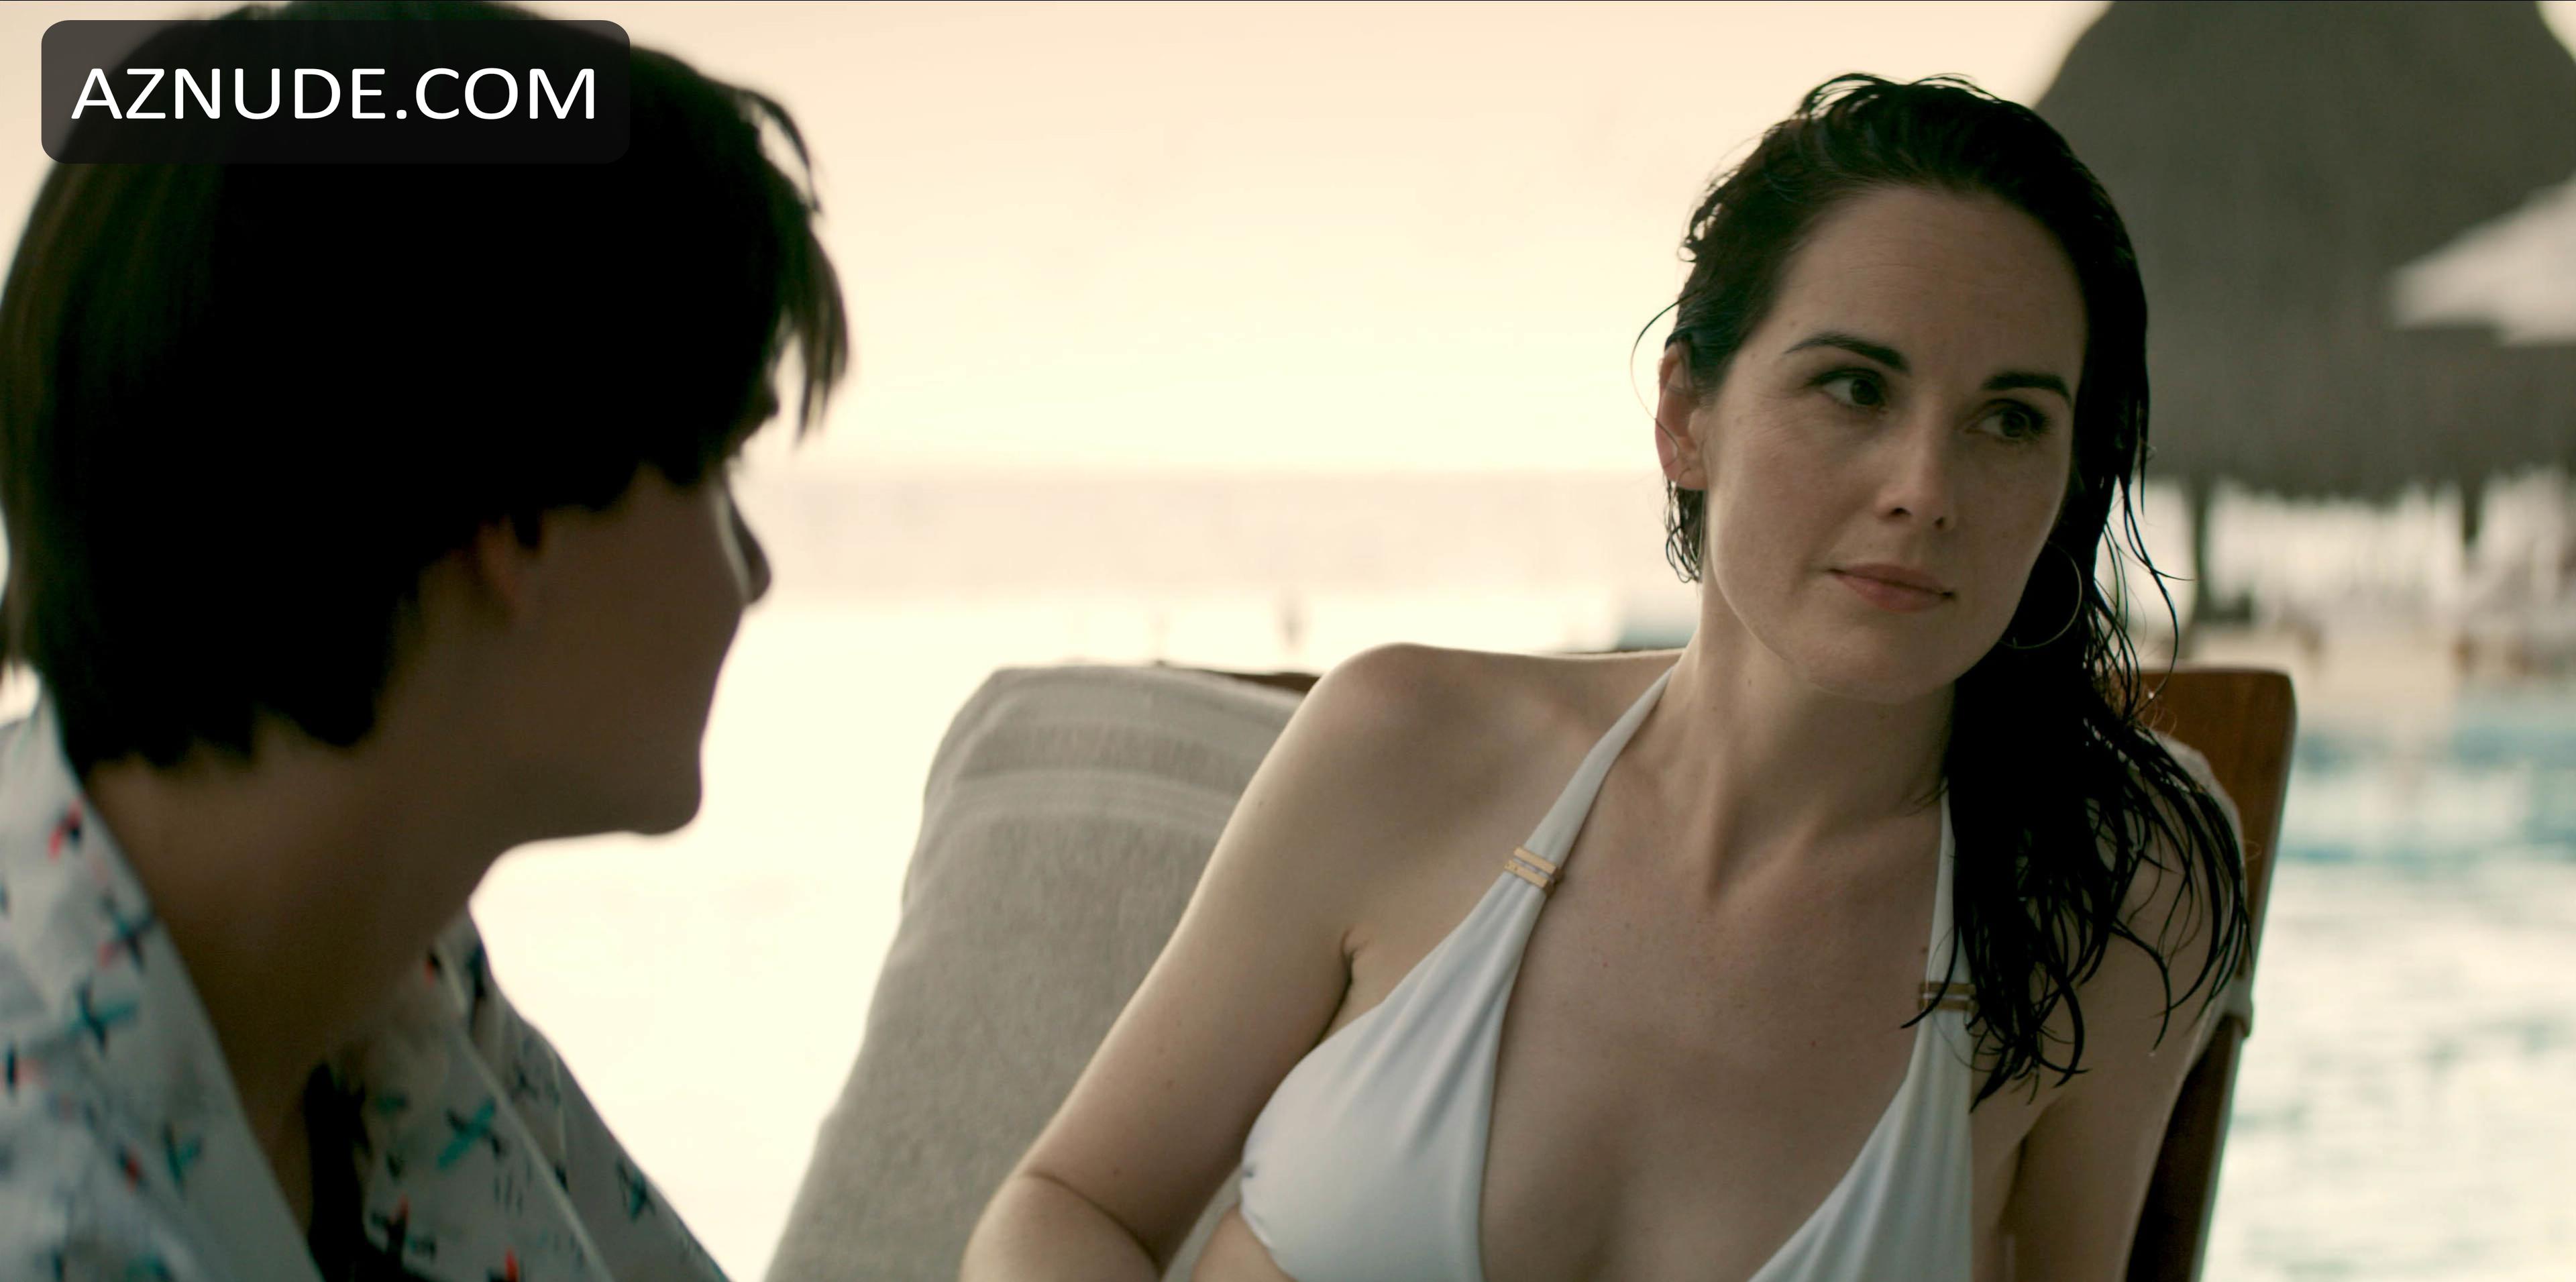 Michelle dockery nude images